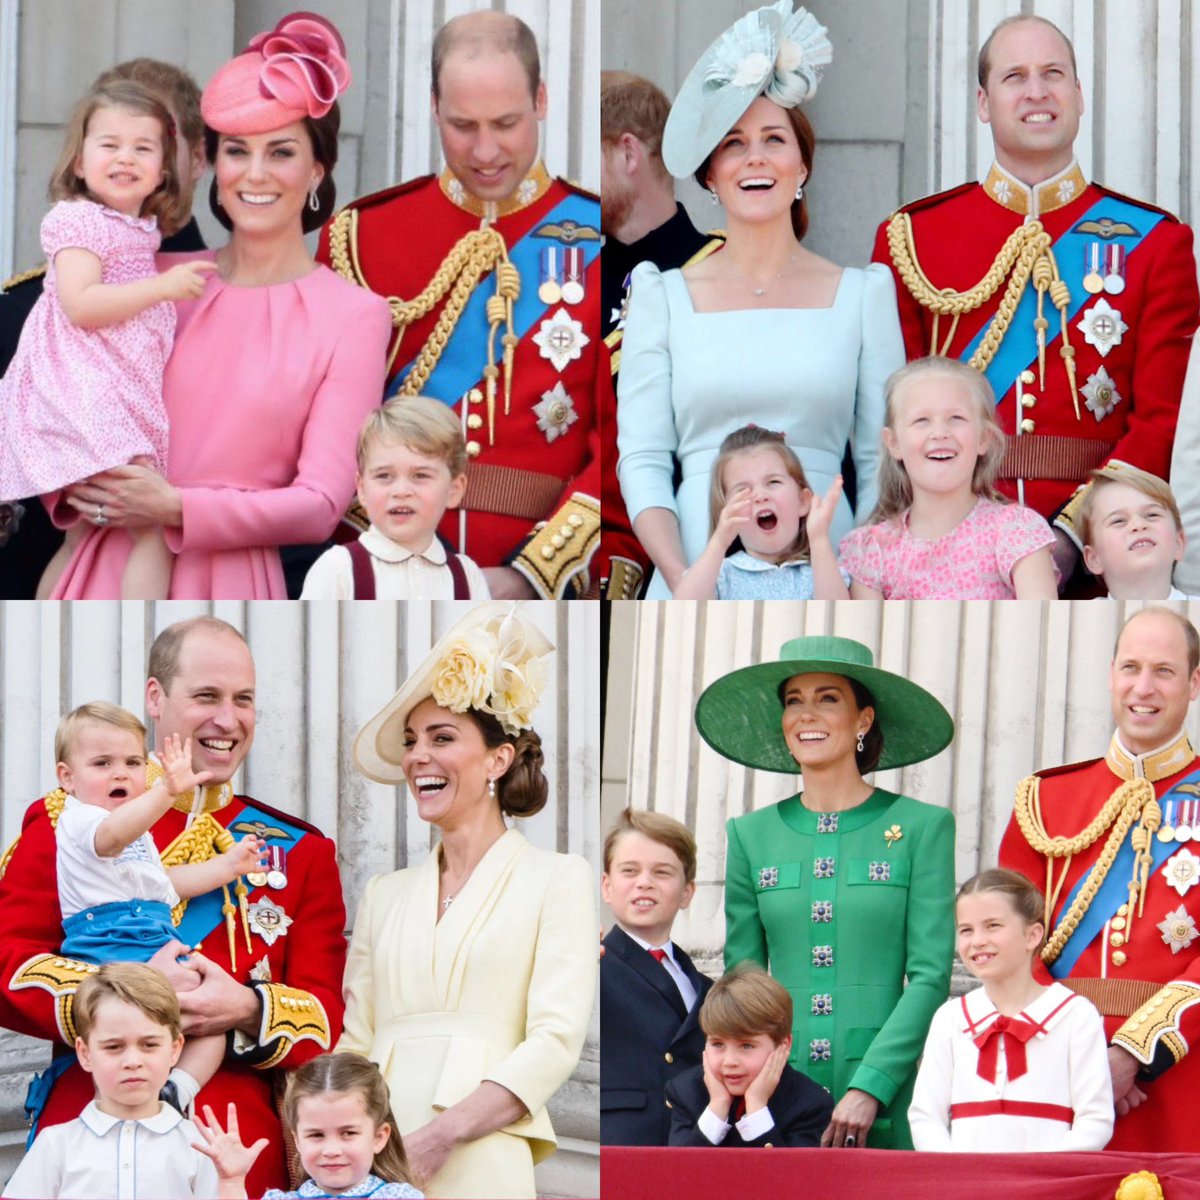 The Wales family attending Trooping the Colour over the years👑

What a treat to watch their family, and children, grow🥰